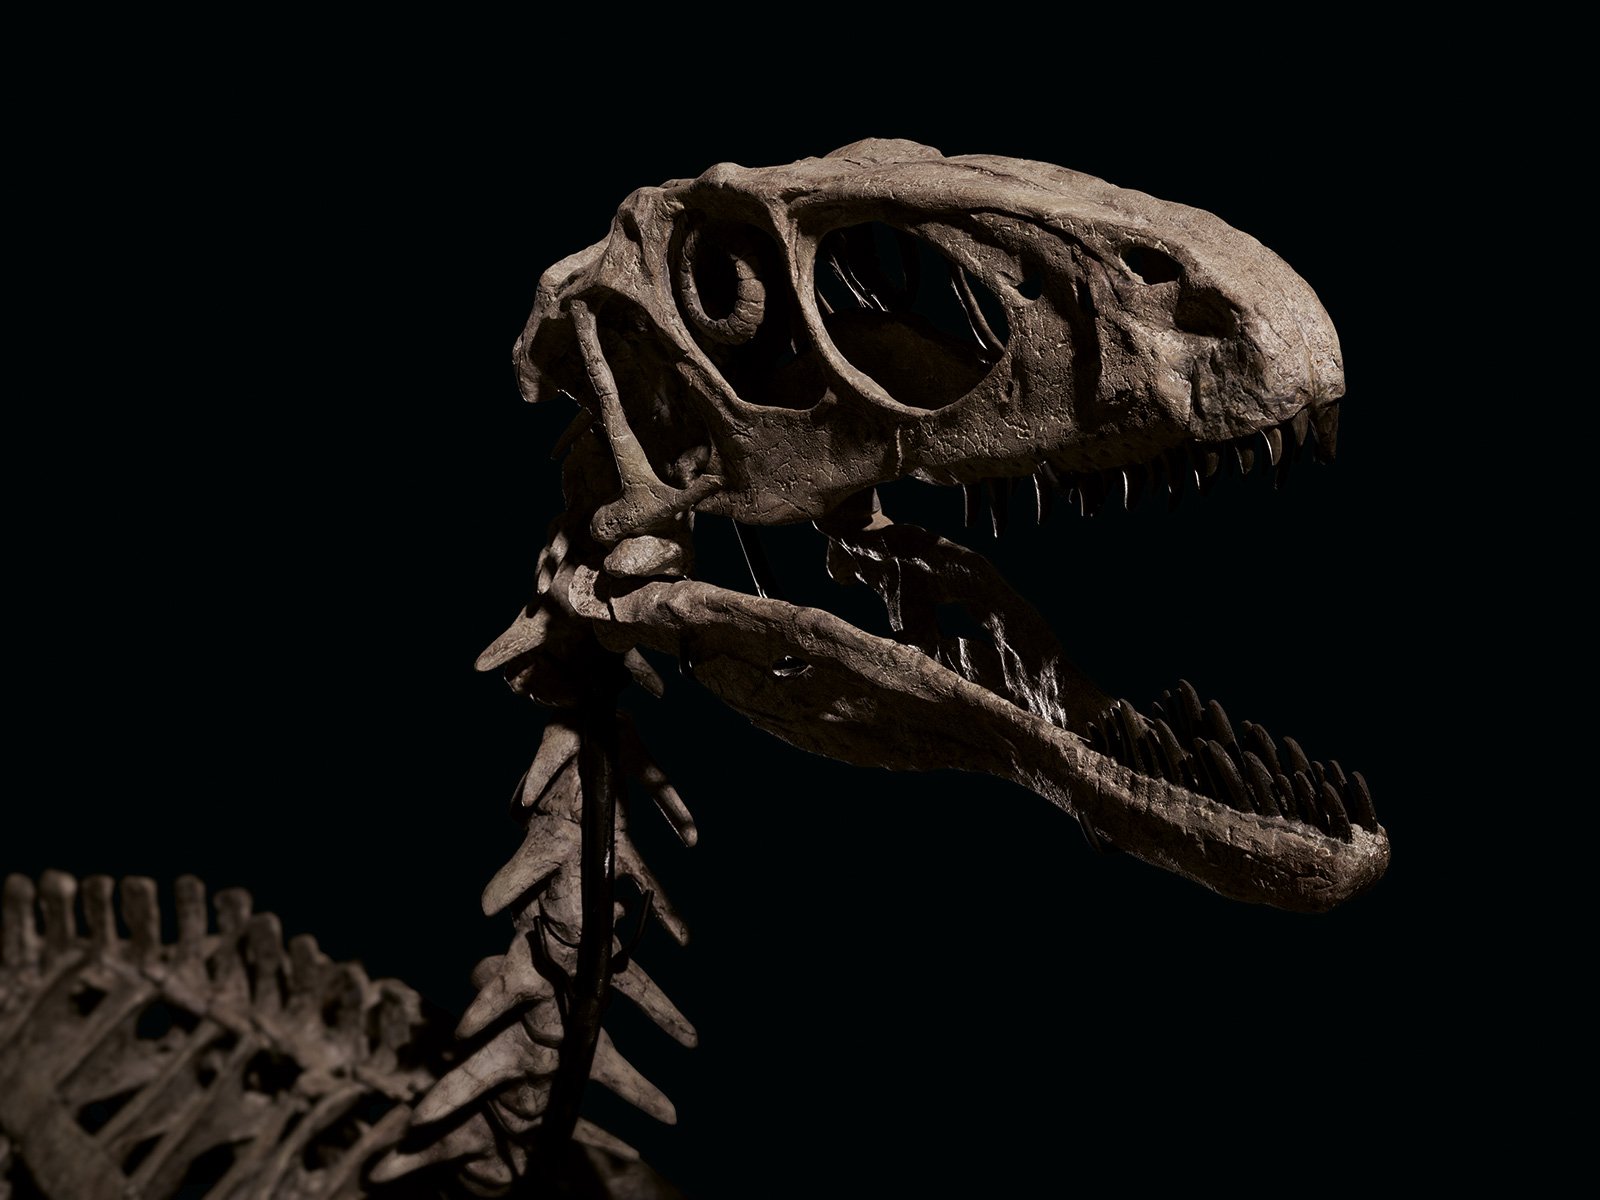 Fossils of a dinosaur that inspired 'Jurassic Park' sold for over $12  million - CNN Style